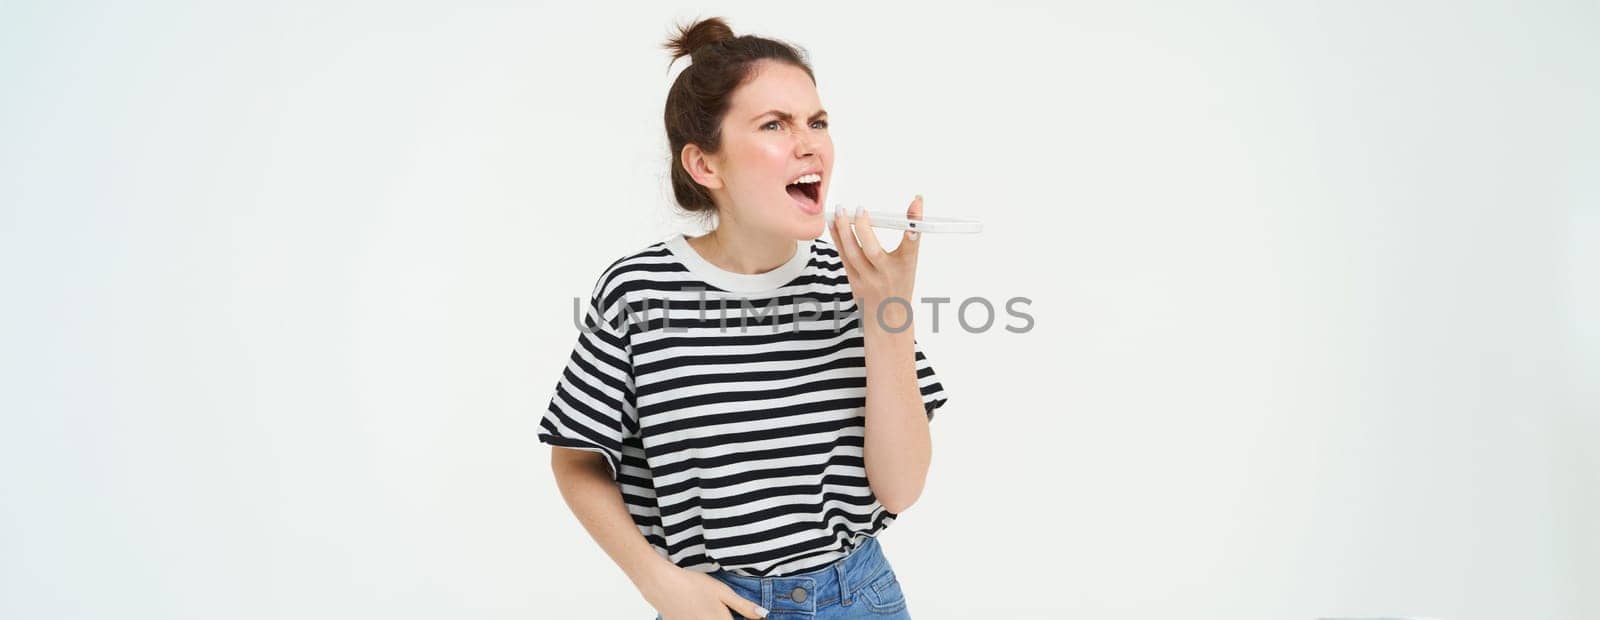 Angry woman shouts at mobile phone, argues at someone over the telephone, has intense conversation over smartphone, white background.